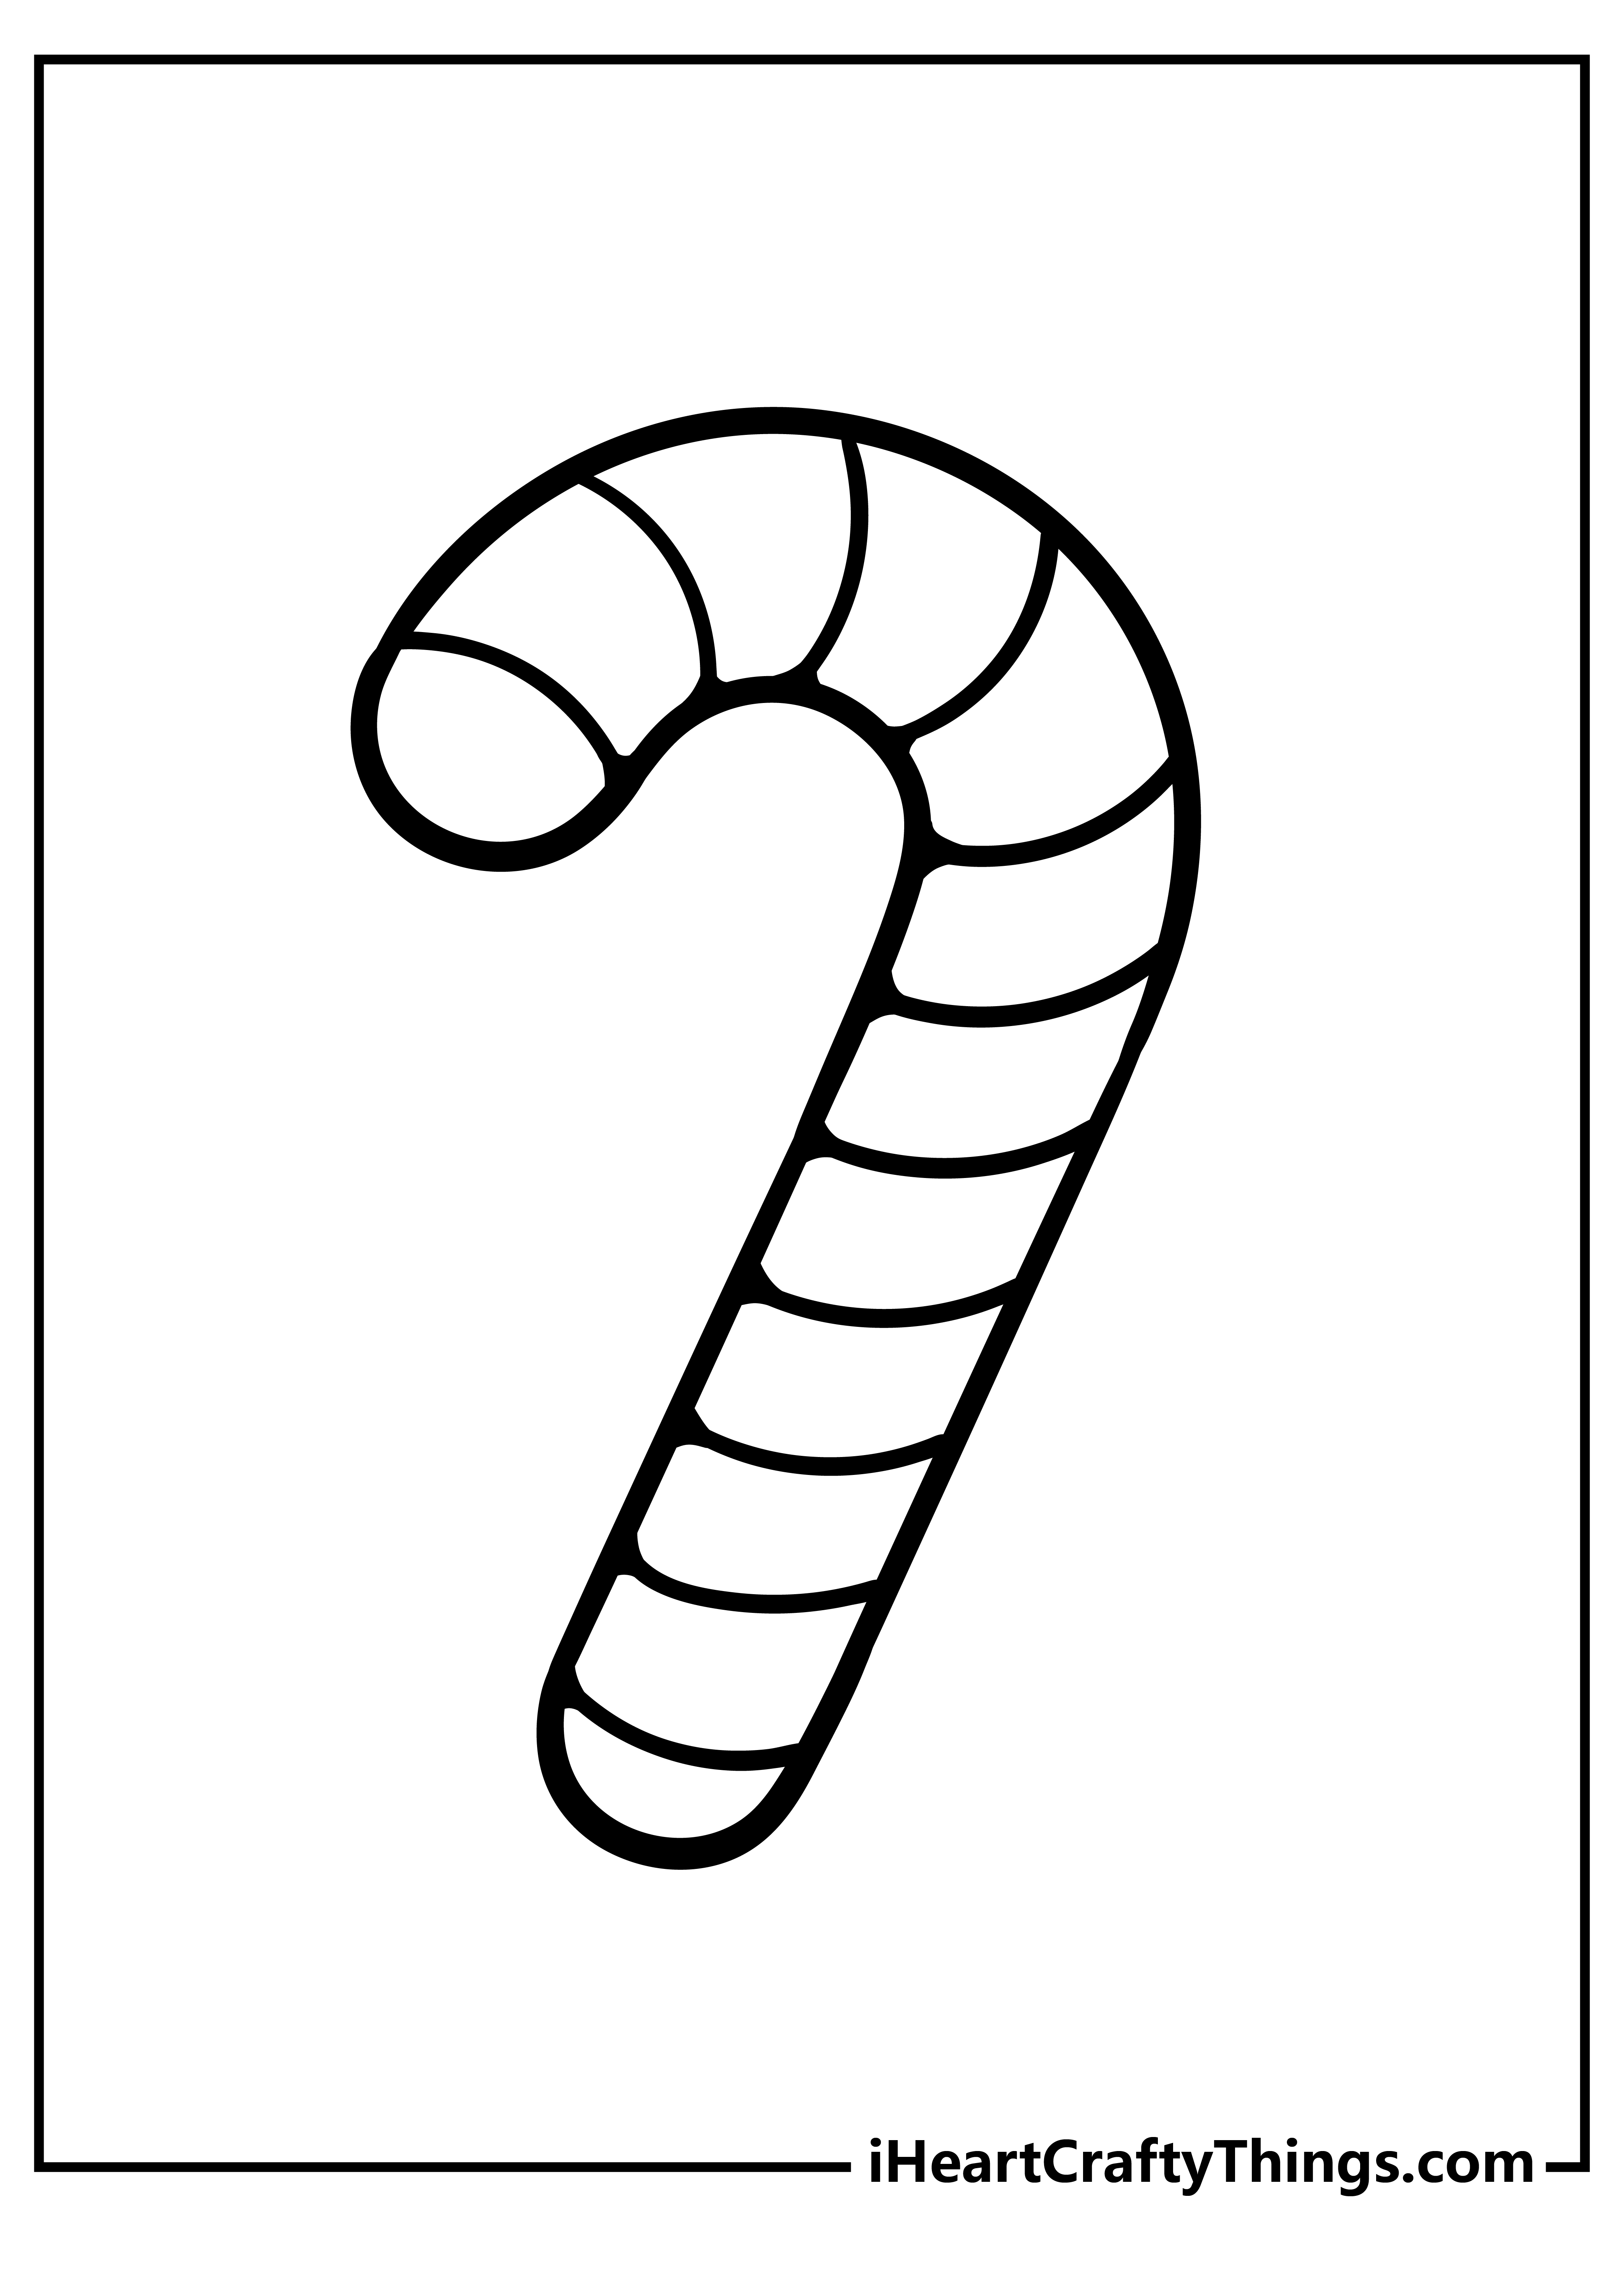 Candy Cane Coloring Pages for preschoolers free printable